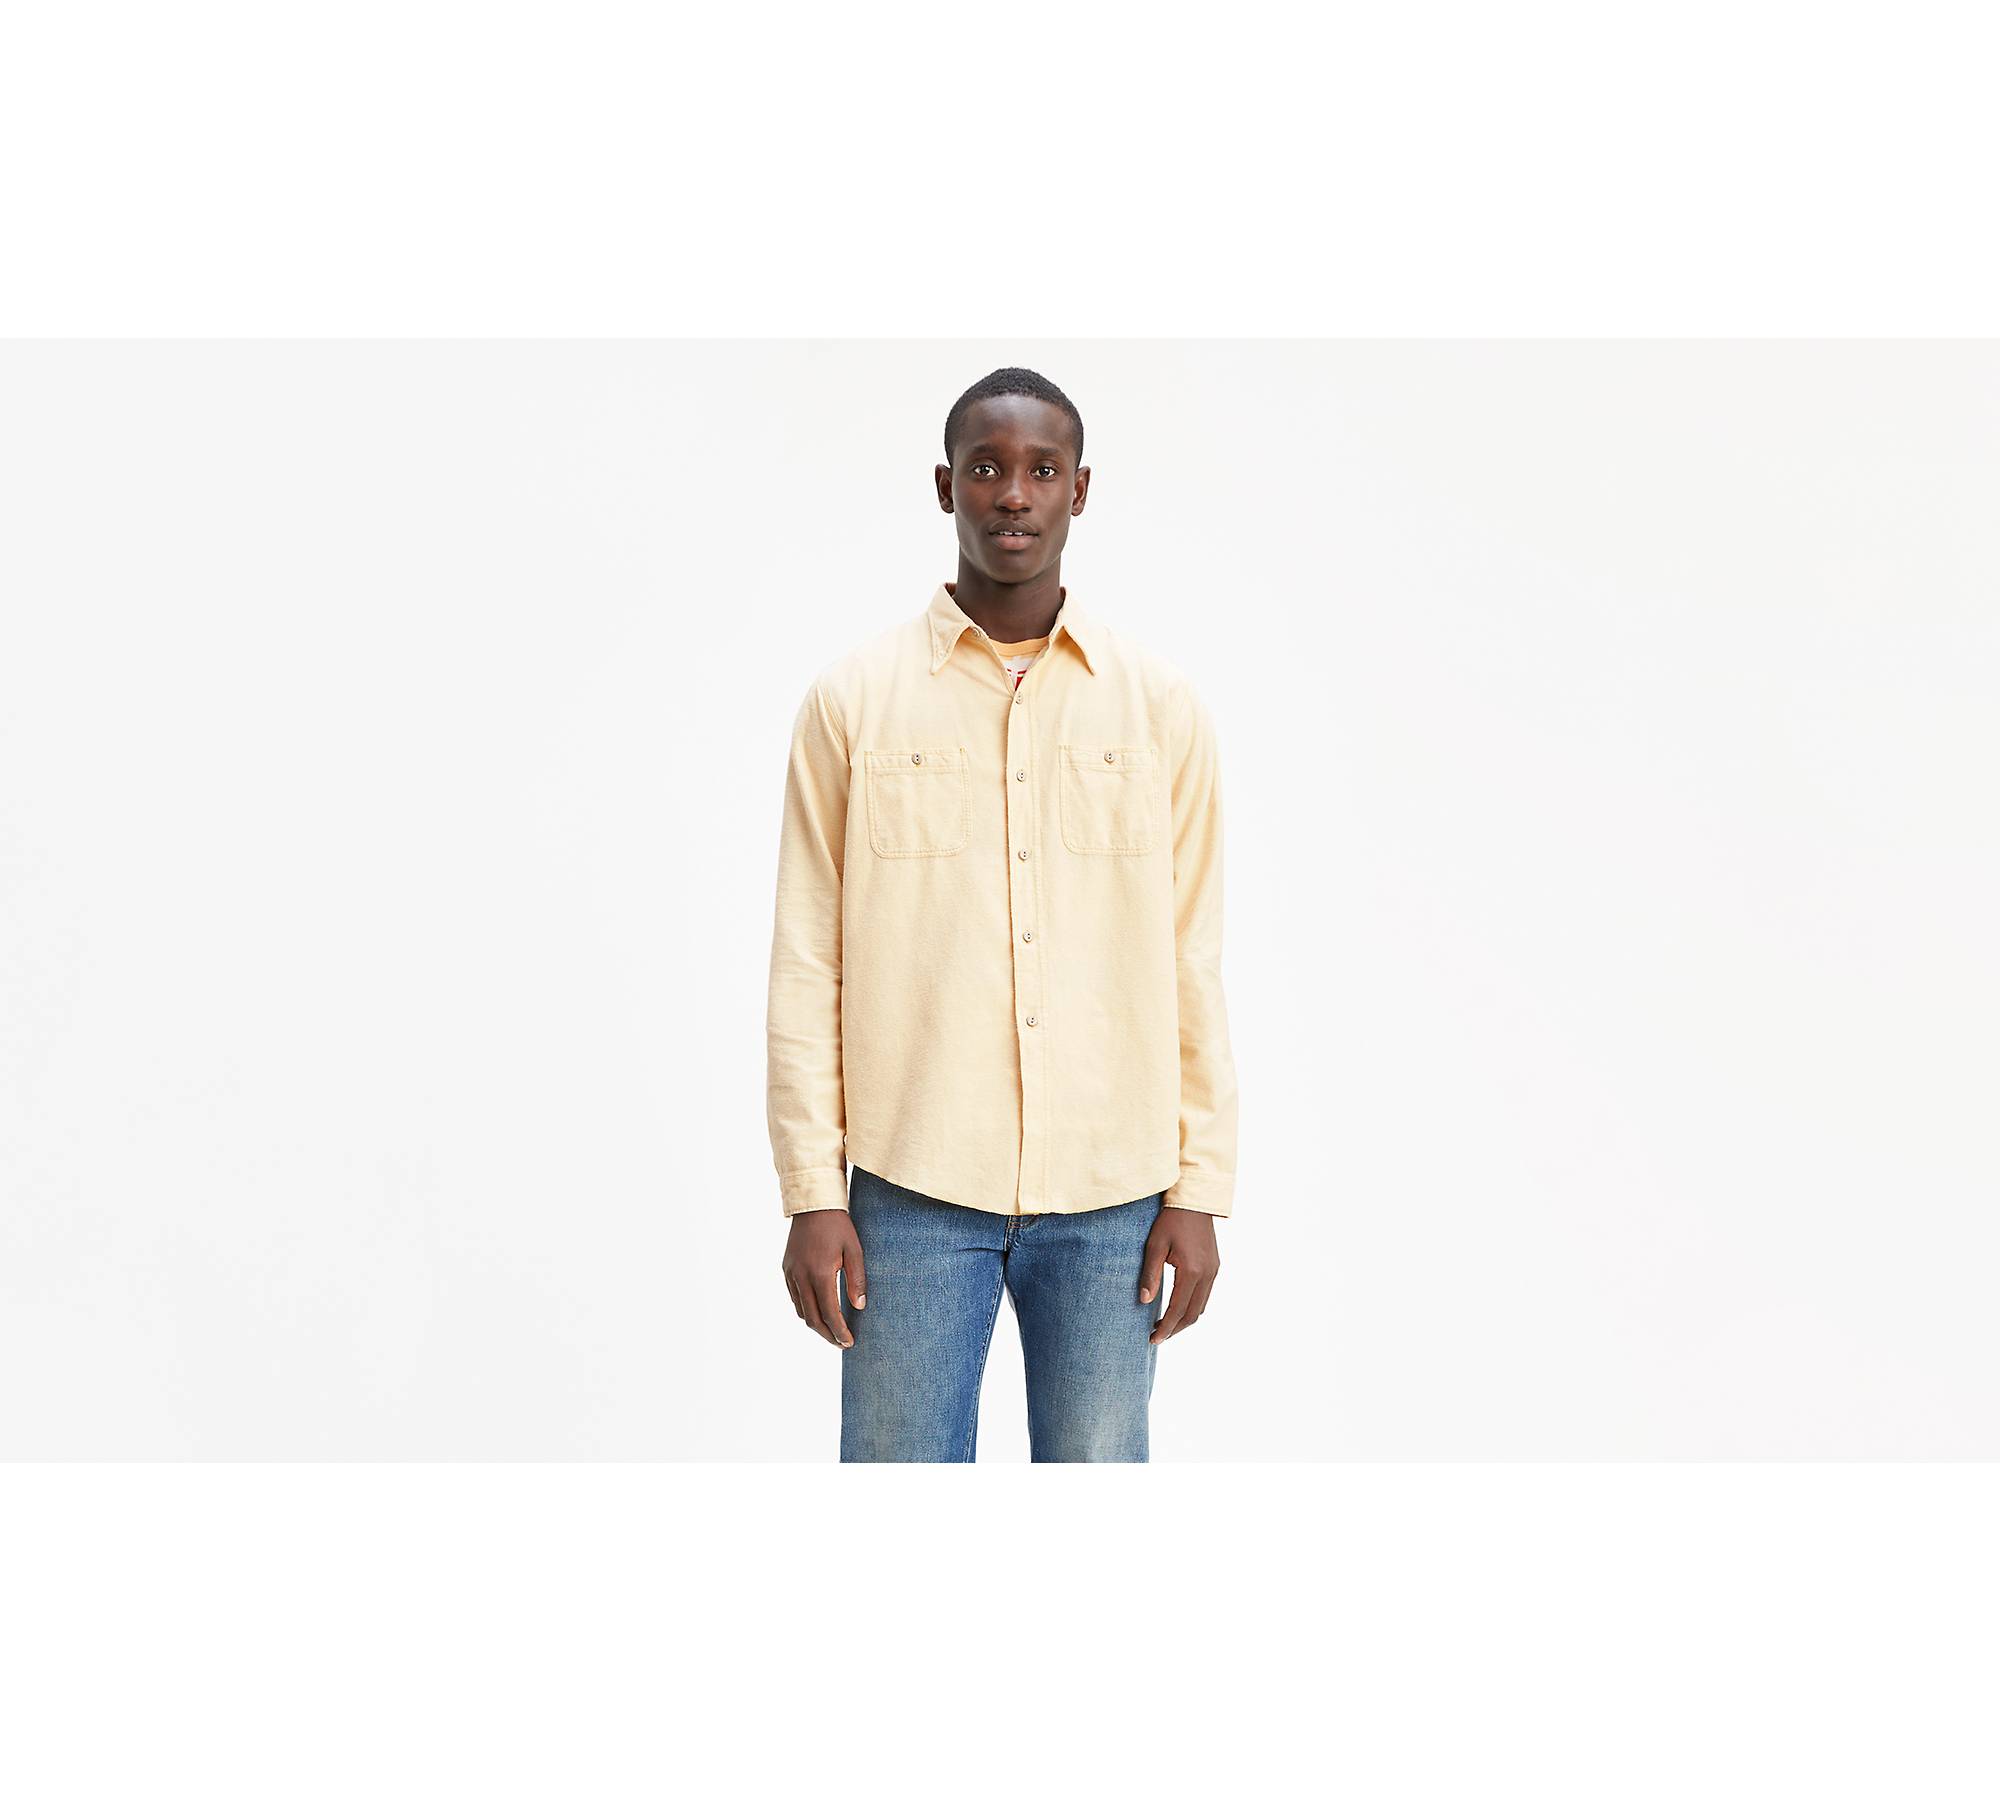 Deluxe Shirt - Brown | Levi's® US